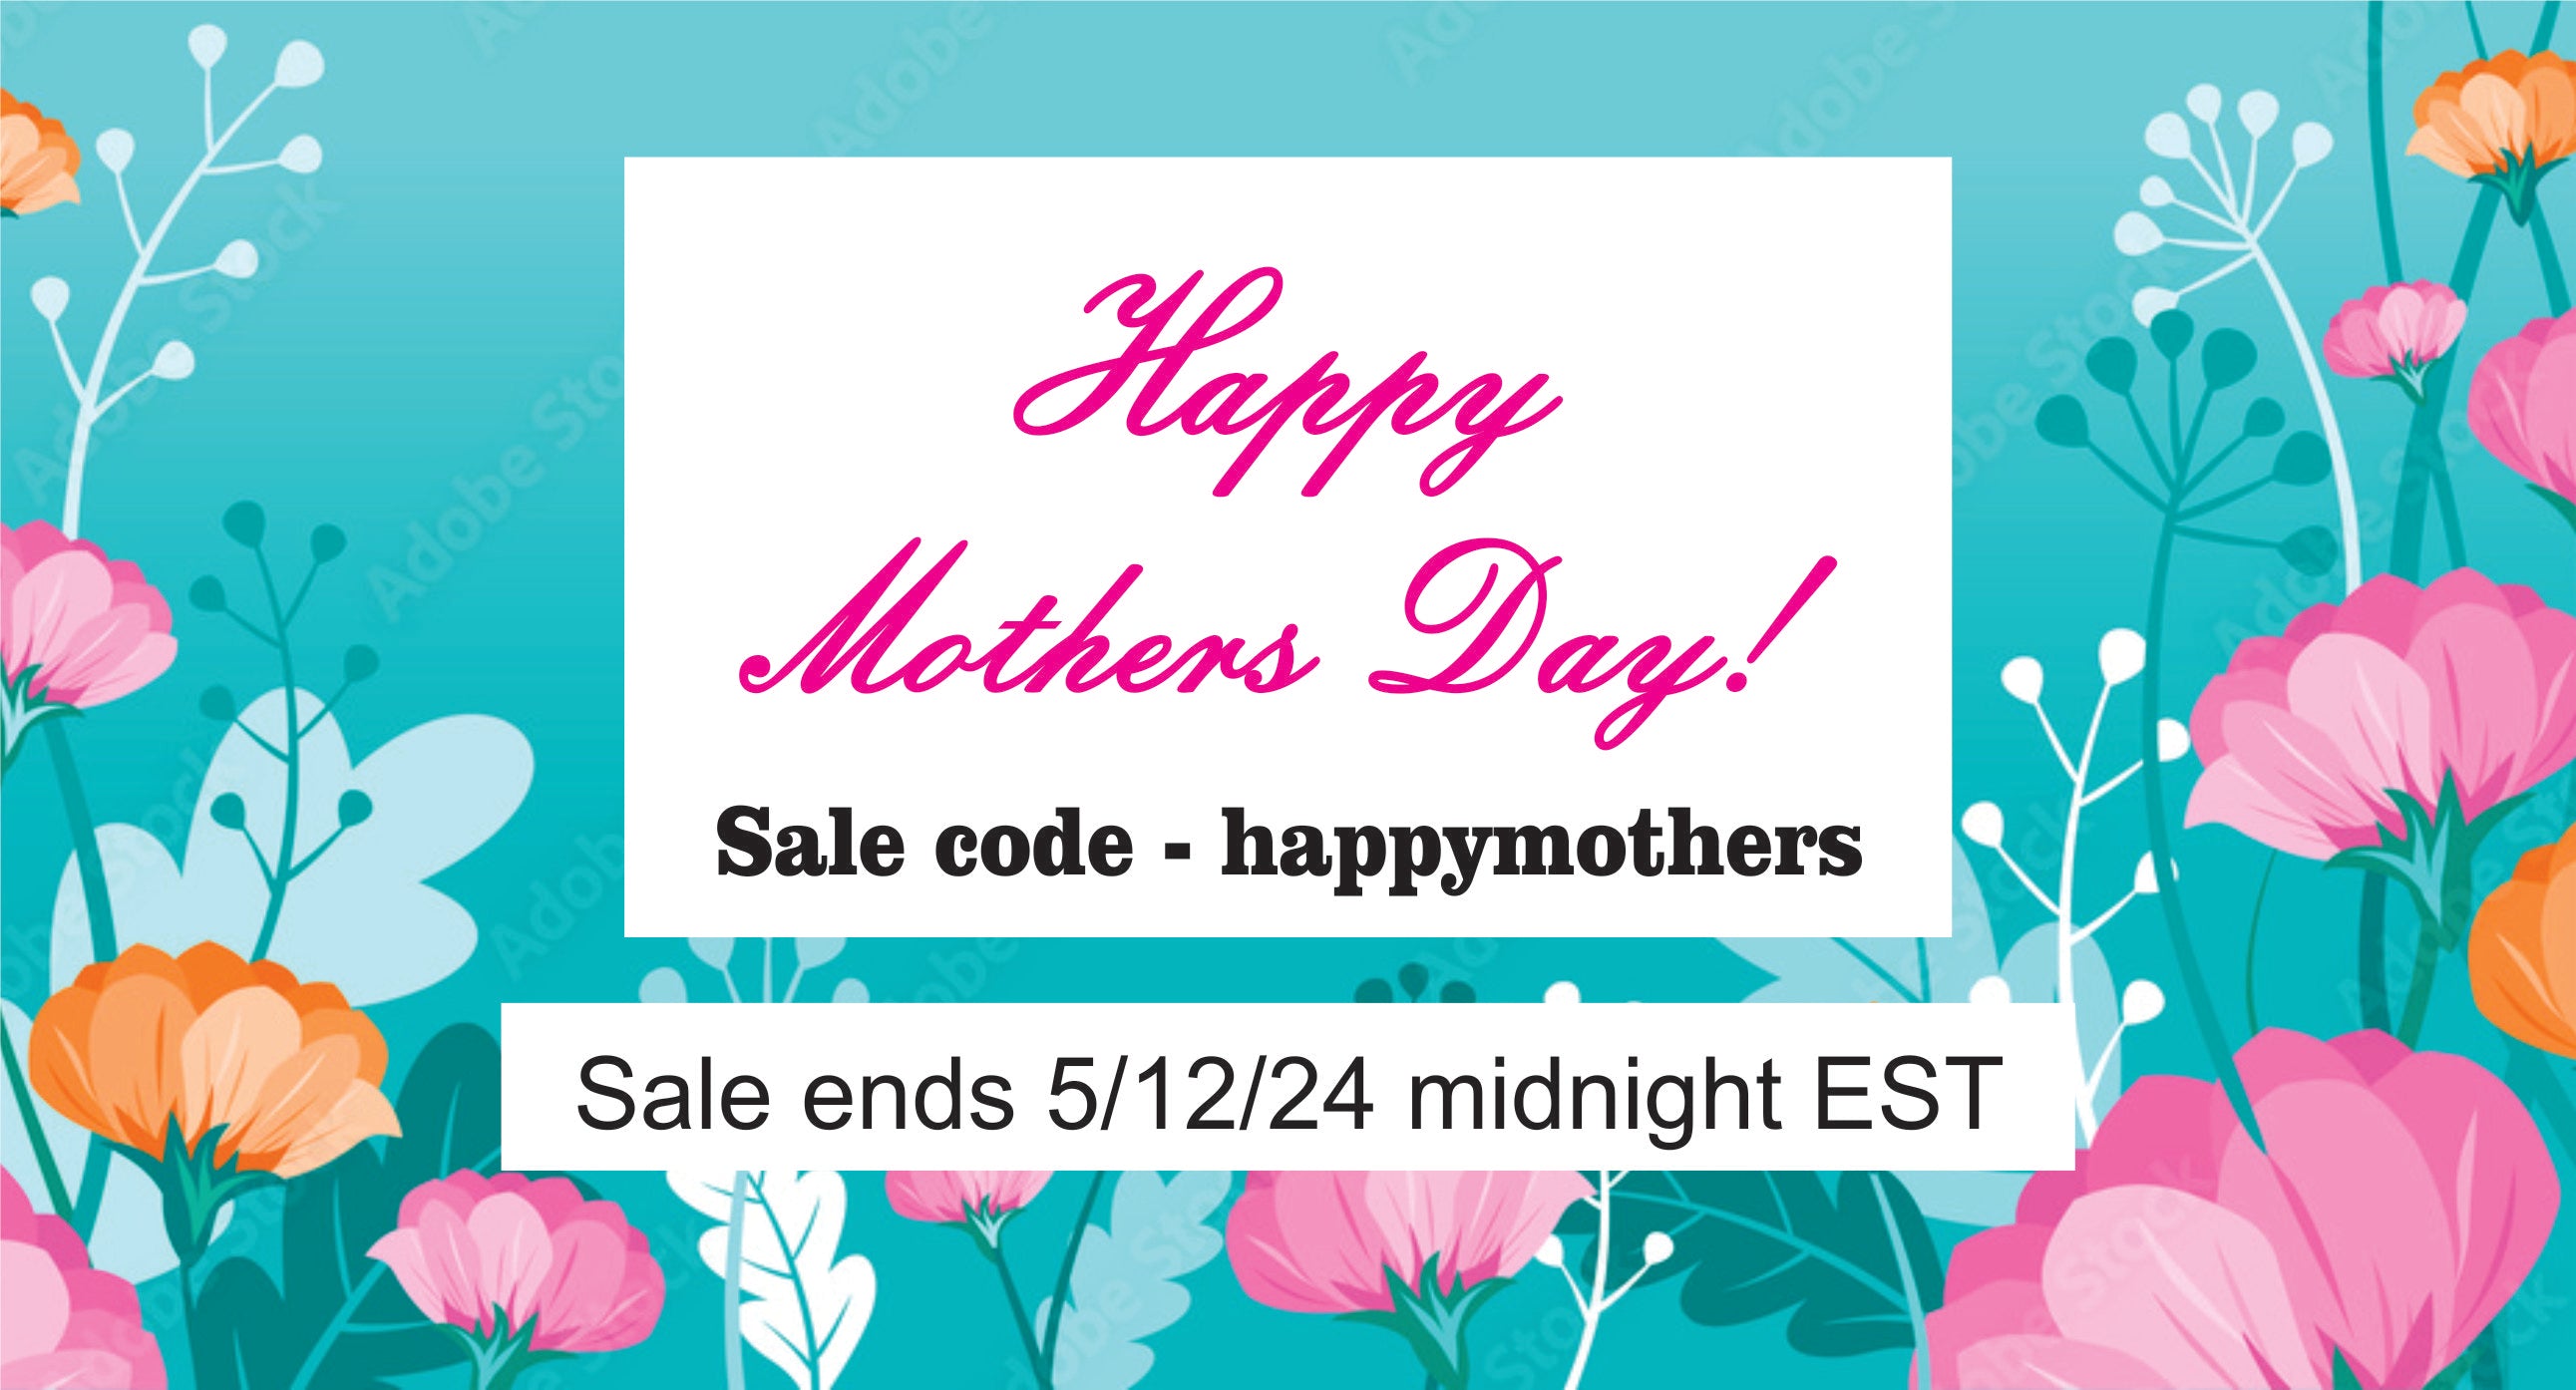 Mother's day SALE - 80% off NOW until midnight EST Sunday!